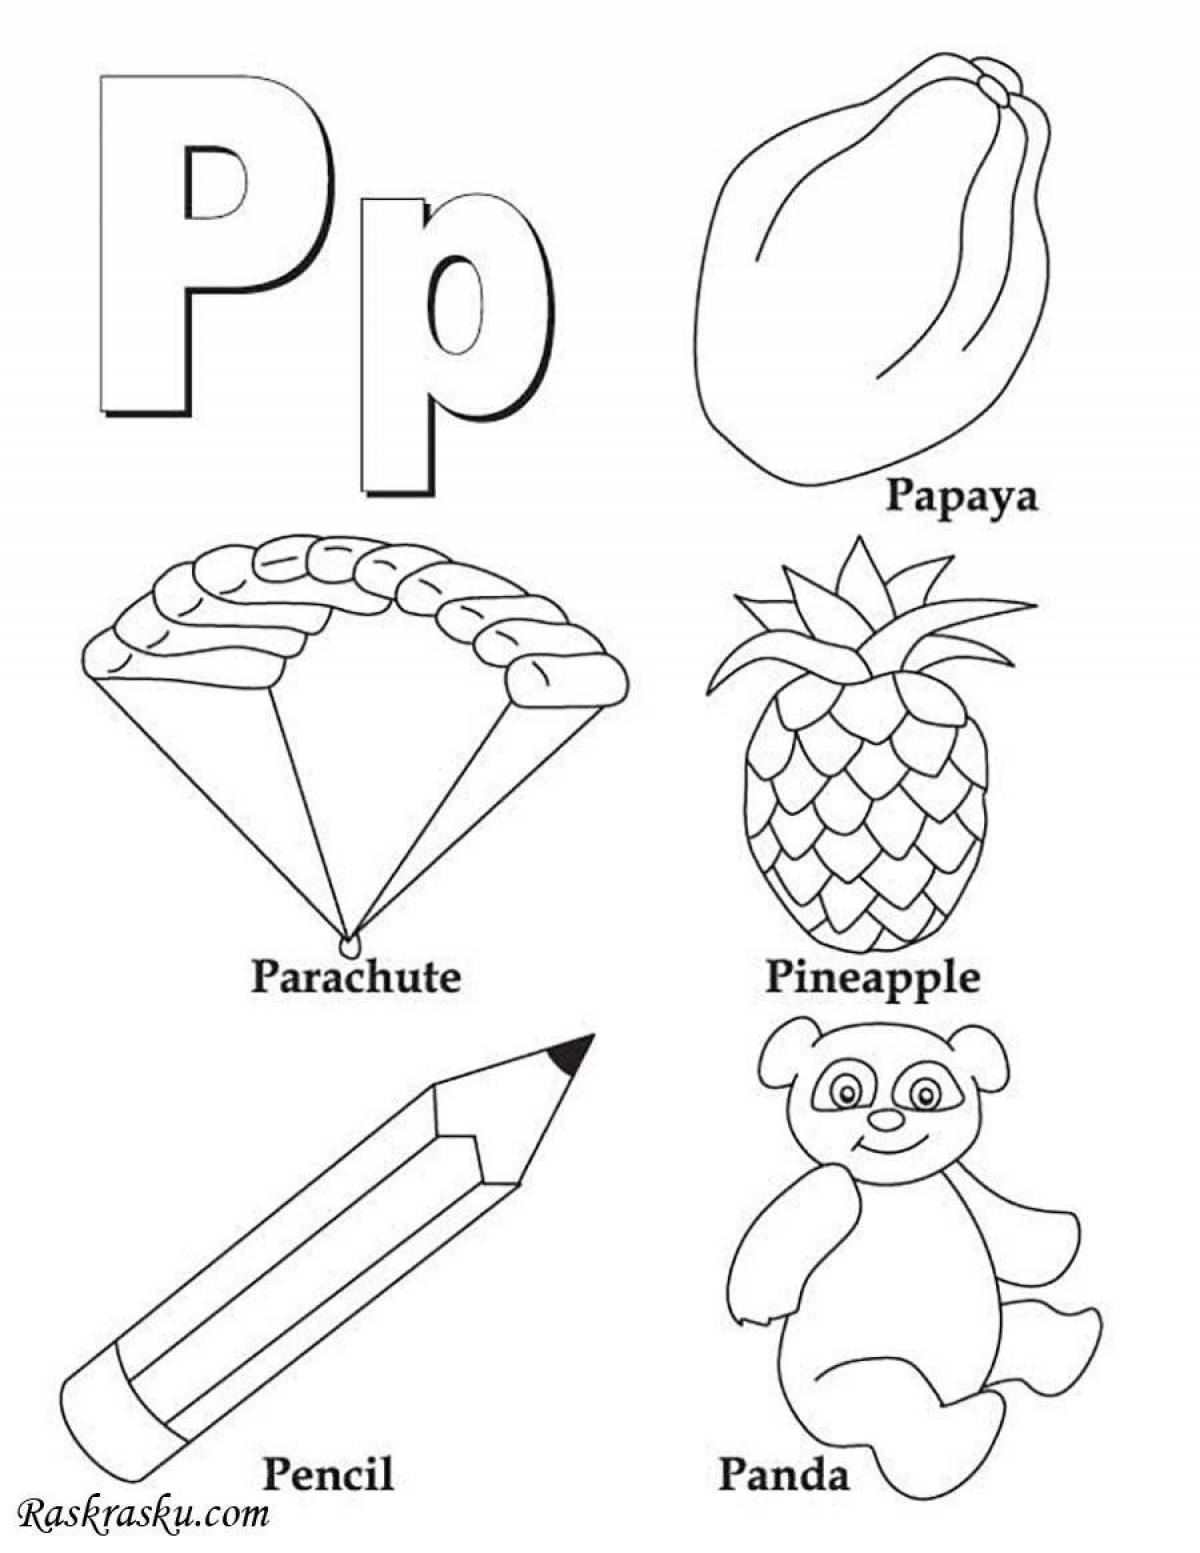 Colorful english alphabet coloring page for little ones